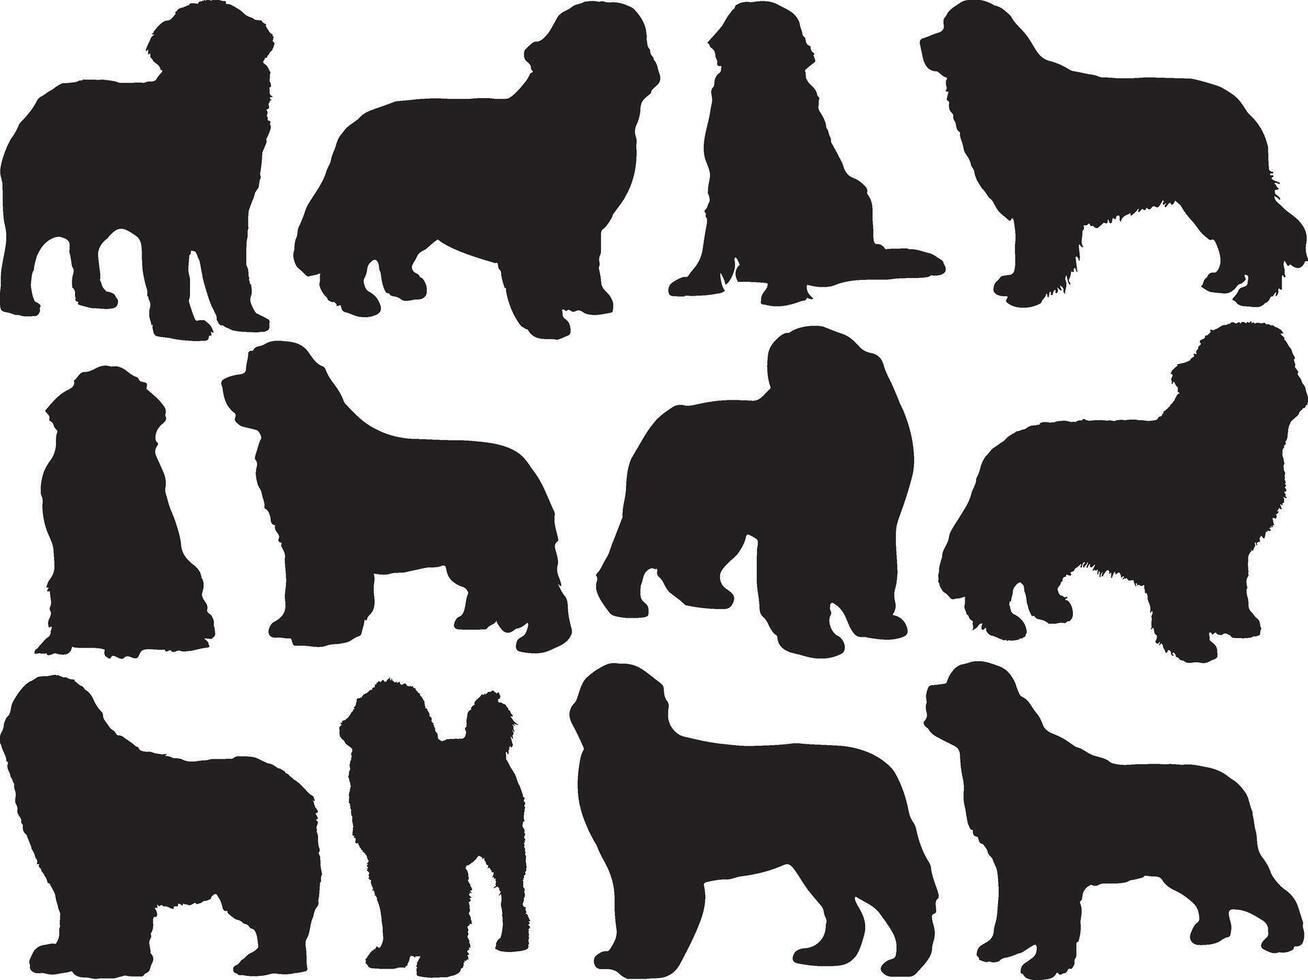 Newfoundland dogs silhouette on white background vector